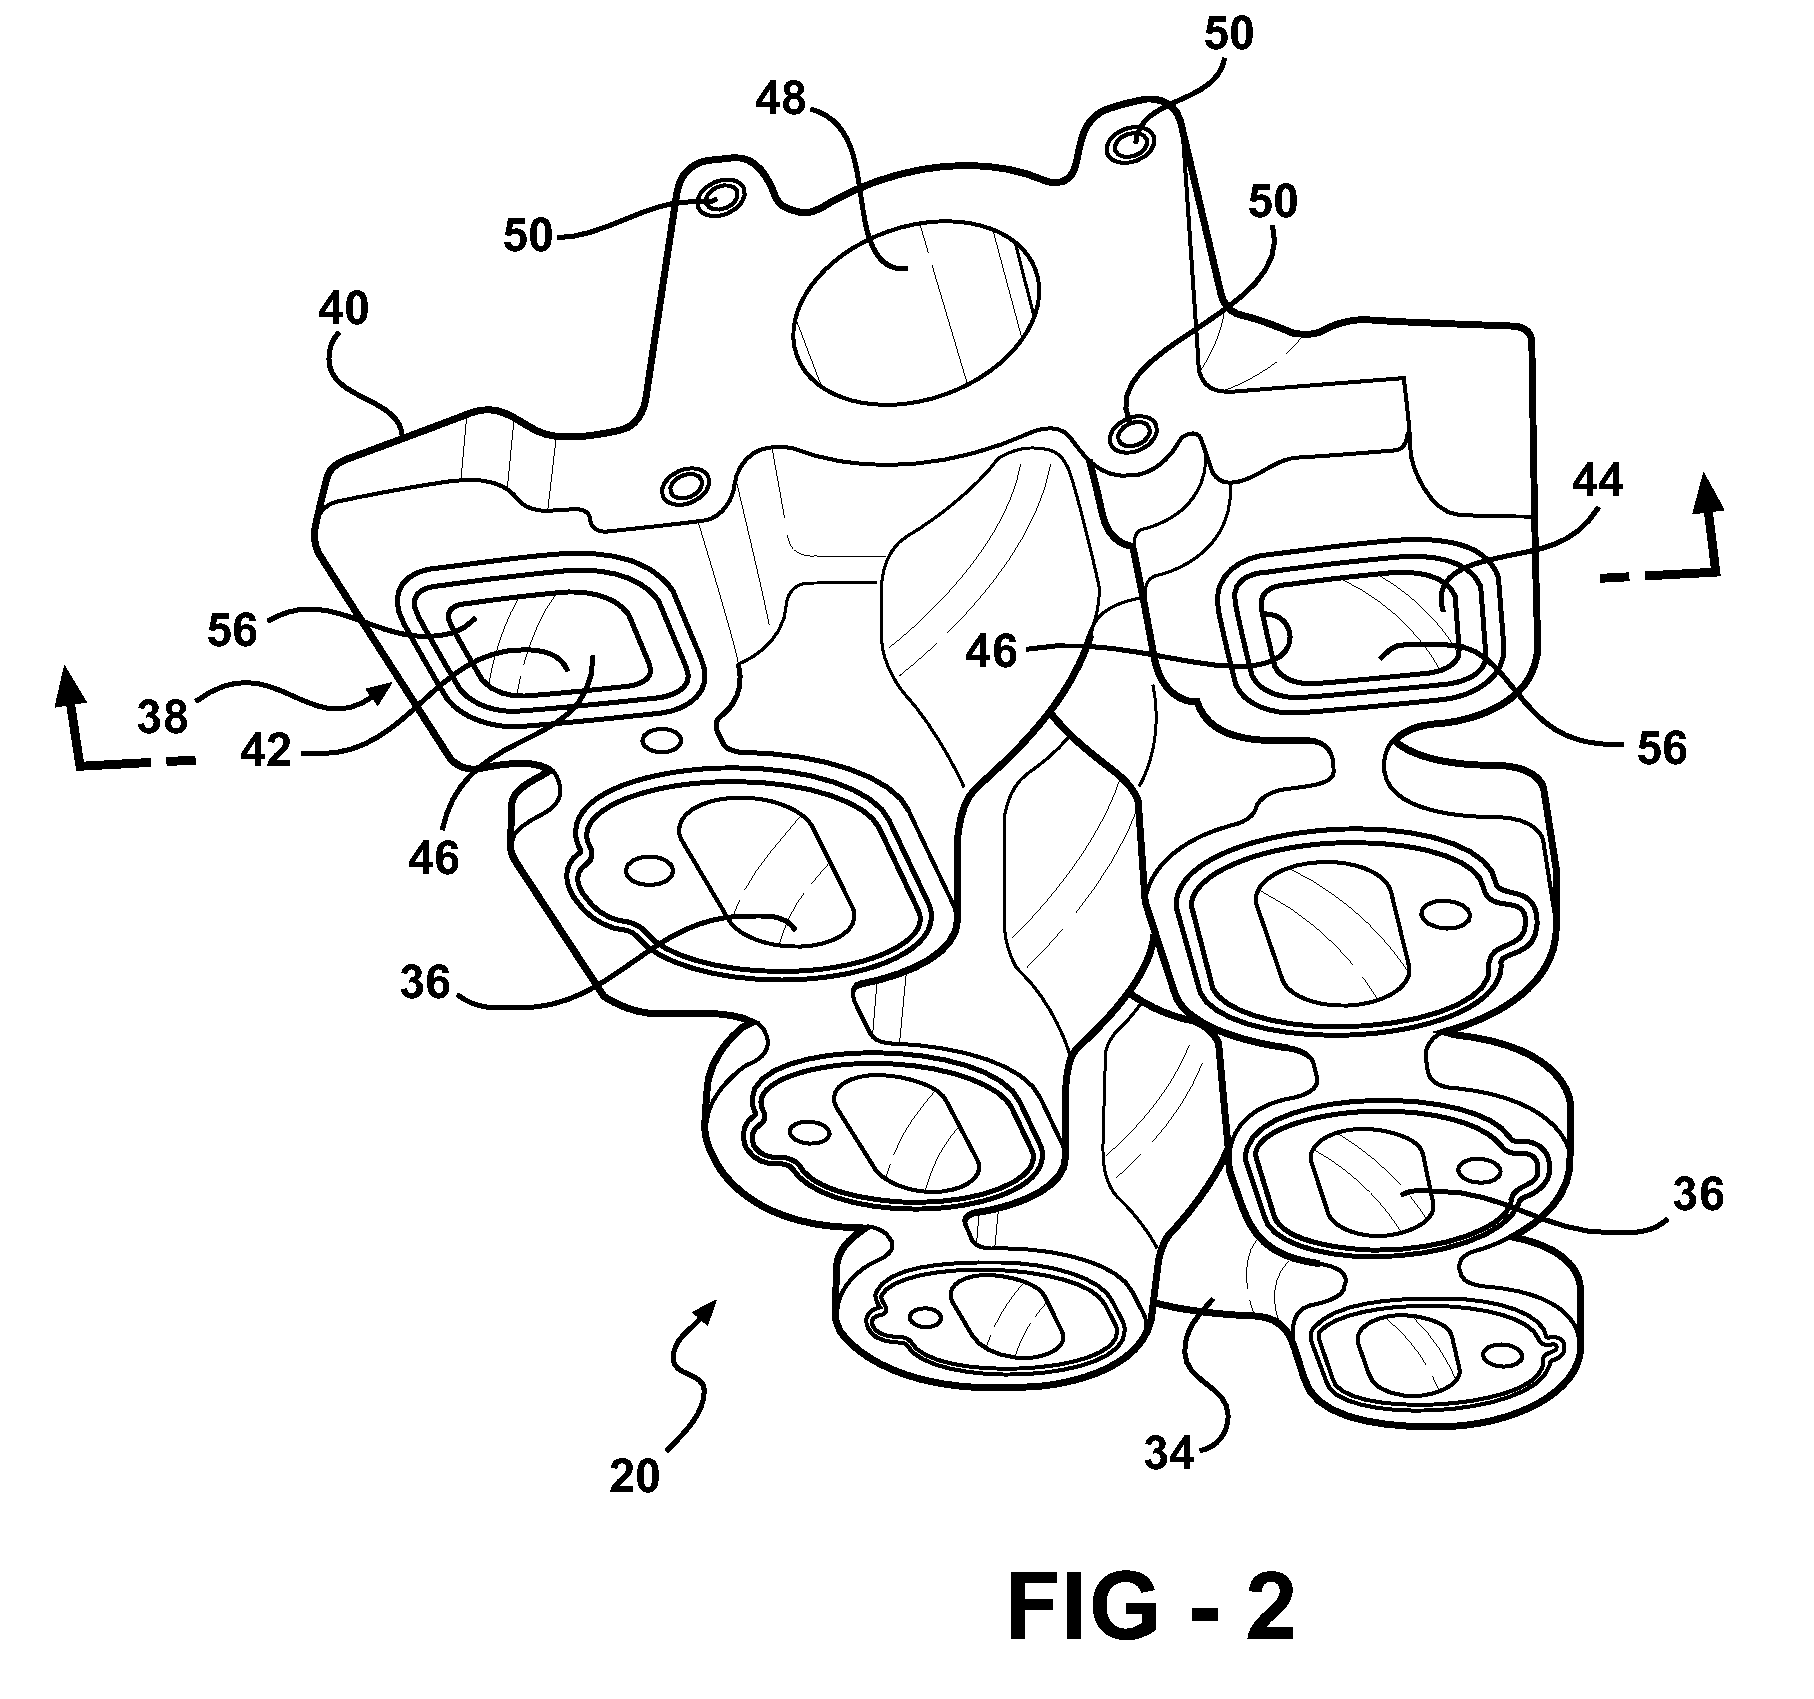 Polyphenylene Sulfide Sleeve In A Nylon Coolant Cross-Over Of An Air Intake Manifold